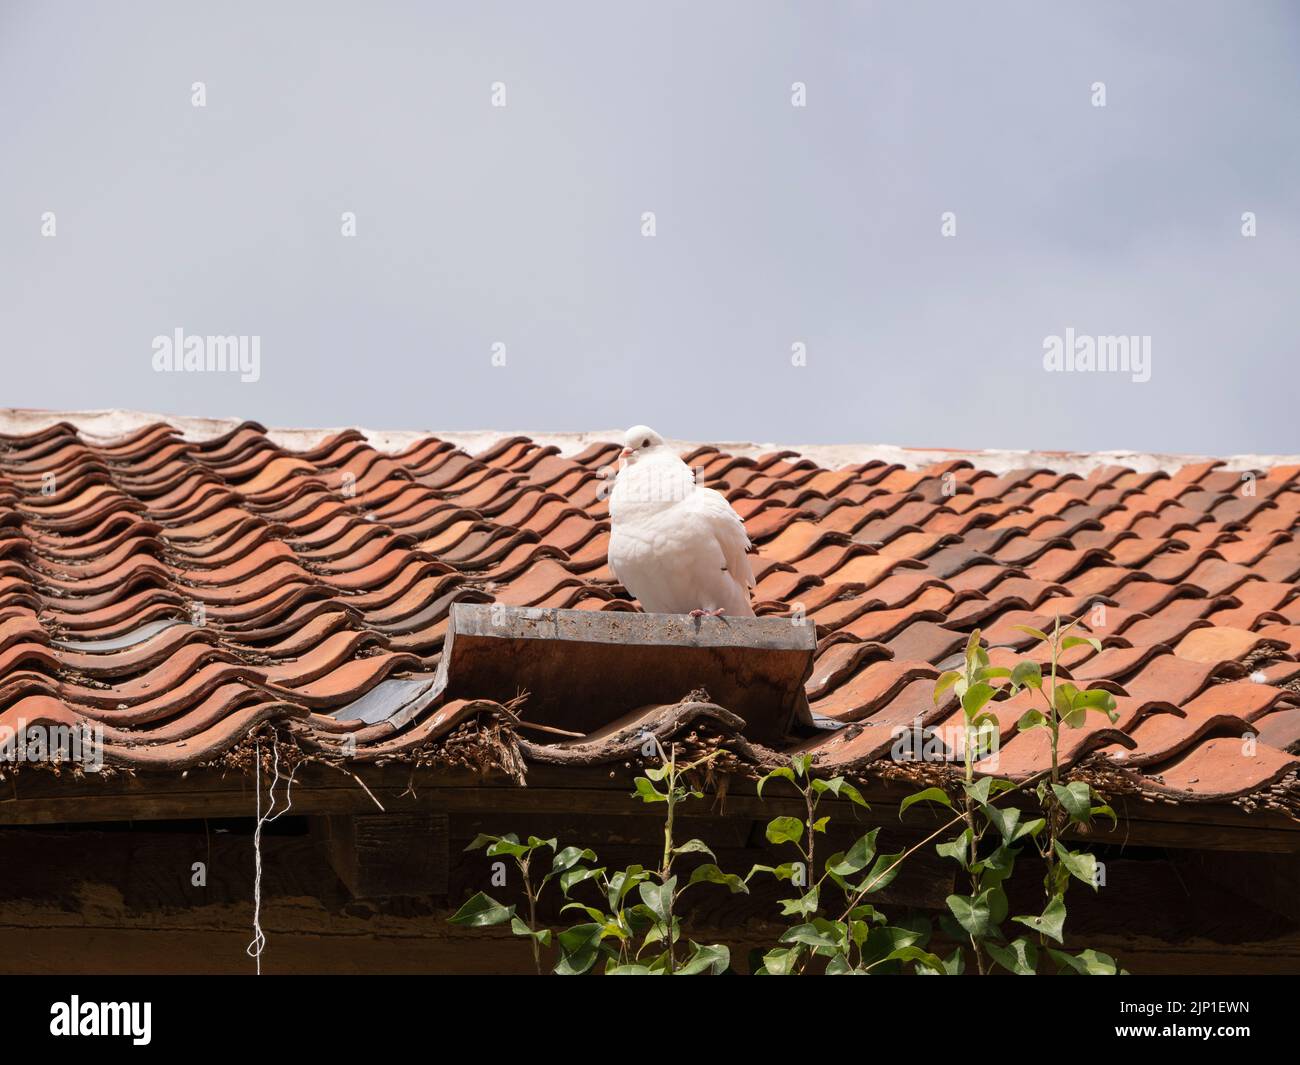 White decorative pigeon sits on a shelf attached to an old tile roof Stock Photo